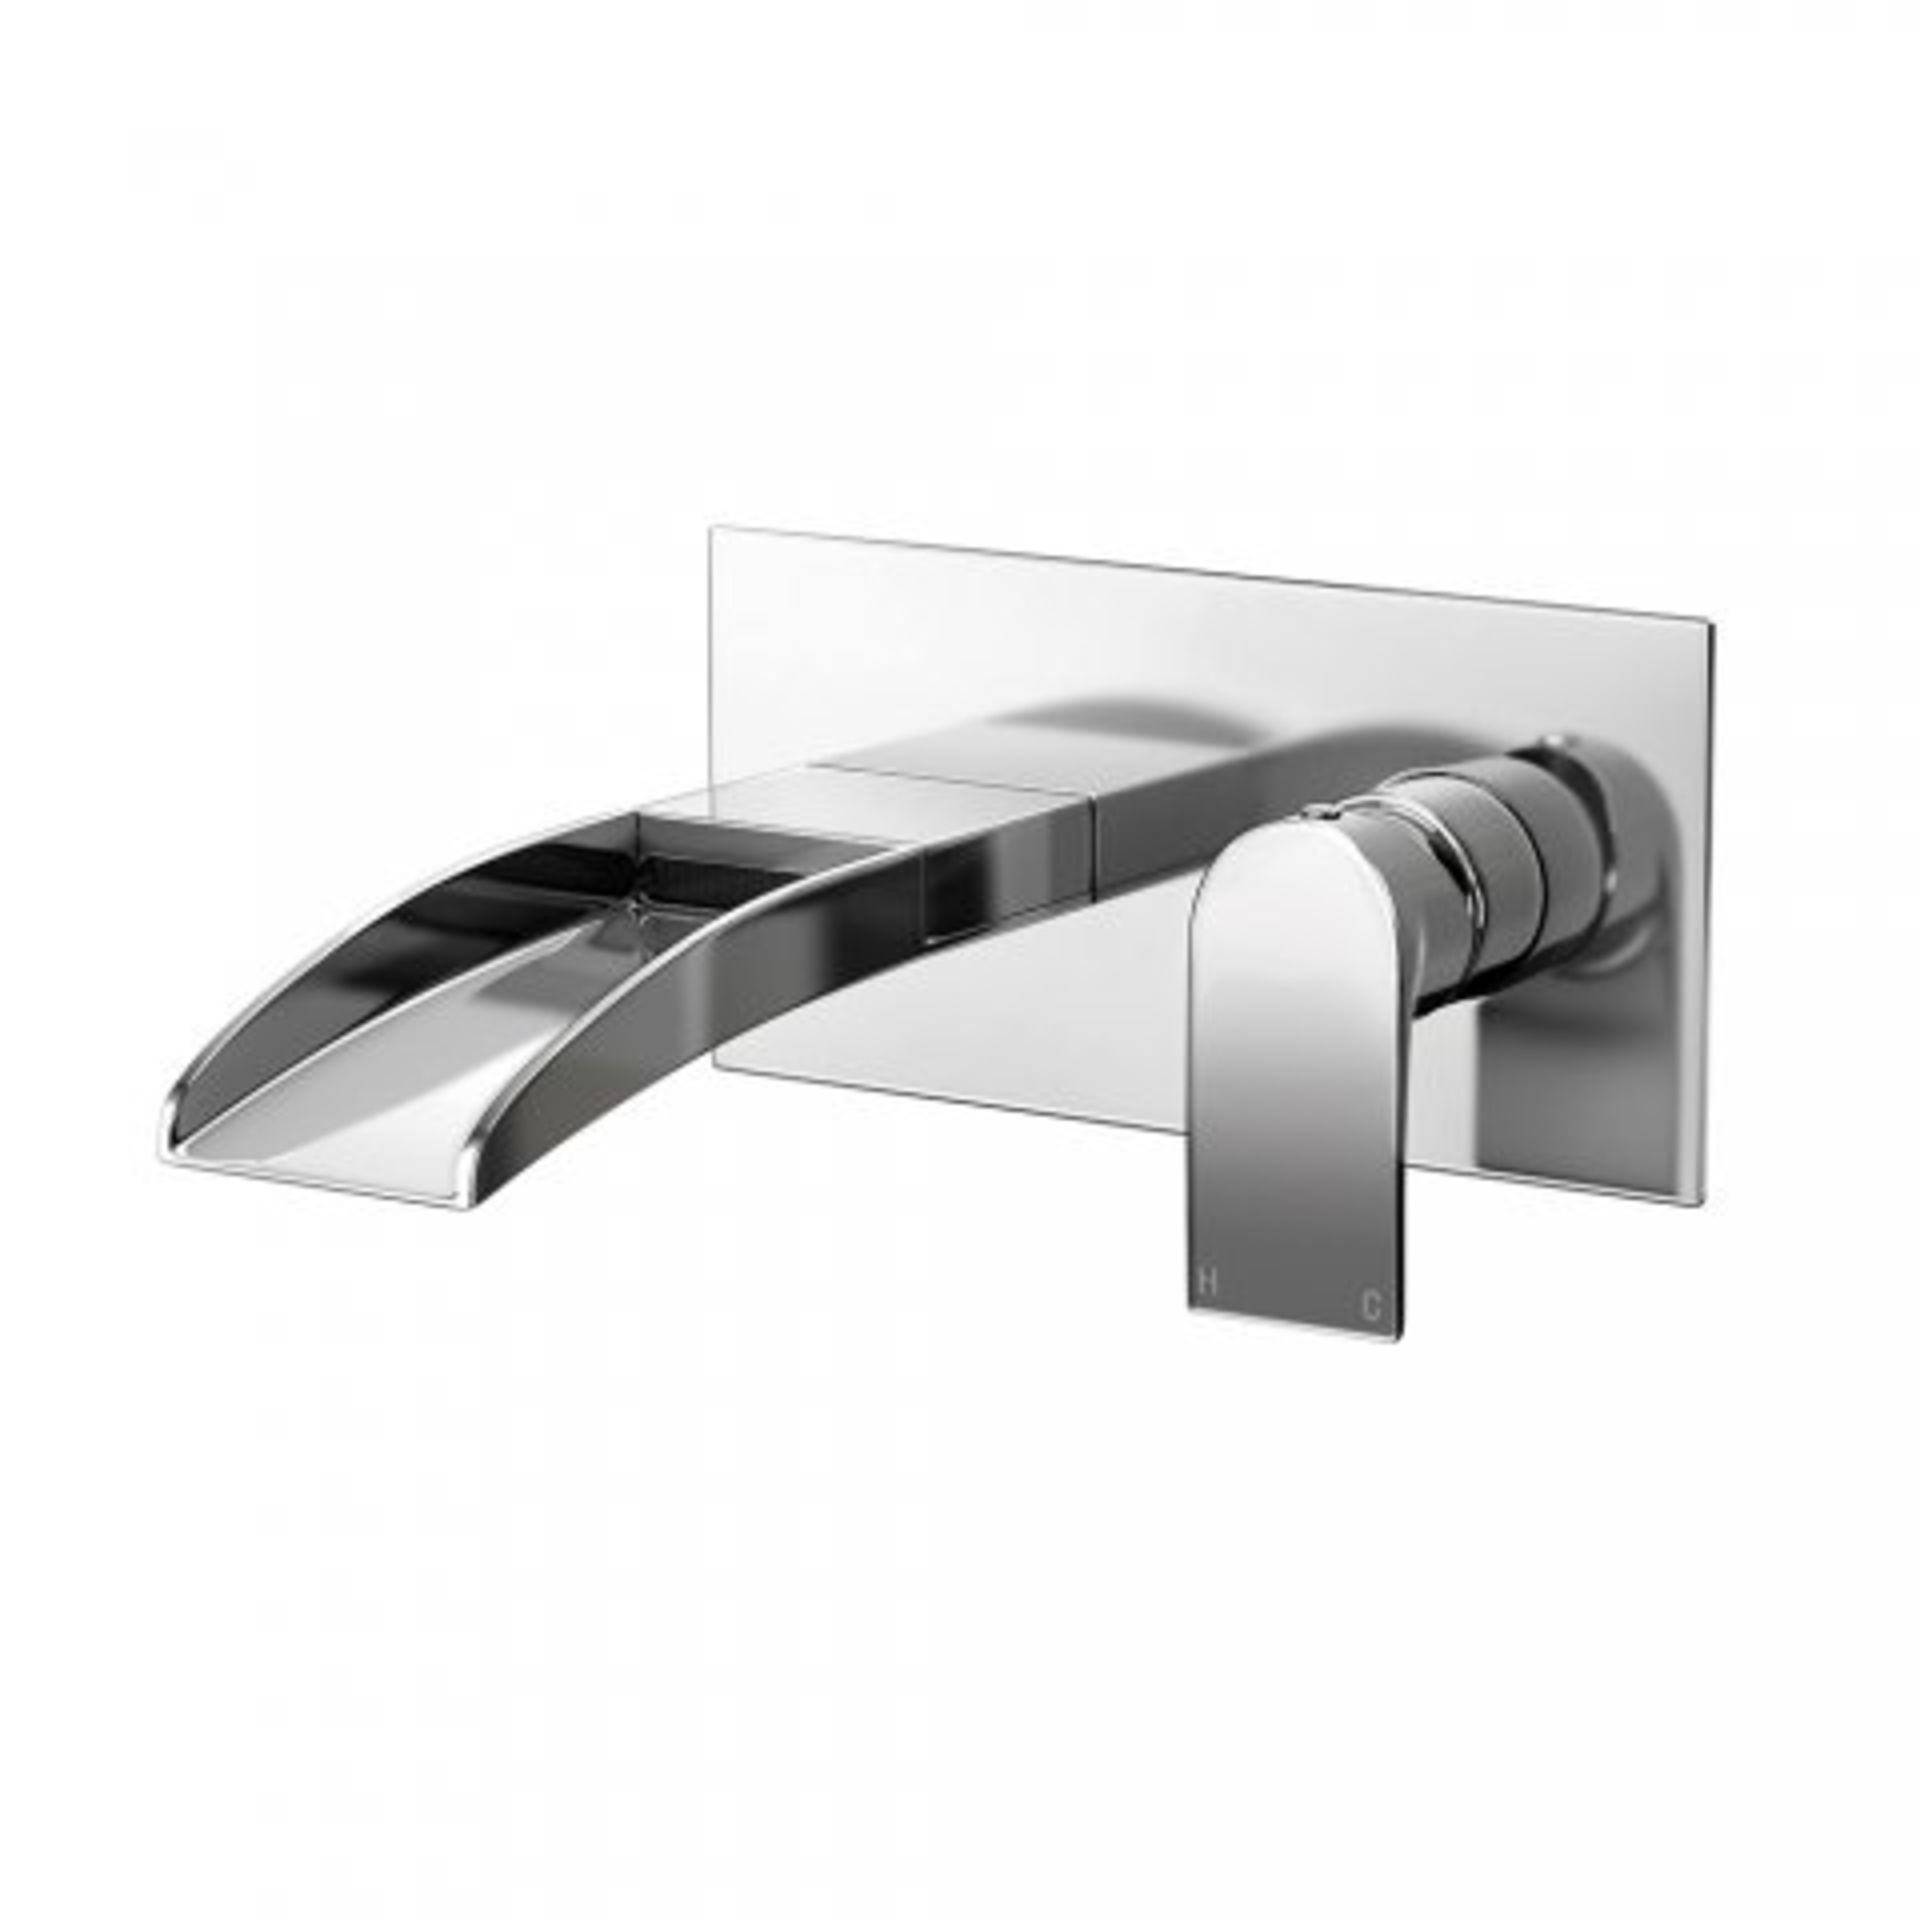 (H39) Avis II Wall Mounted Waterfall Bath Mixer Tap This wall mounted basin taps adds a touch of - Image 2 of 3